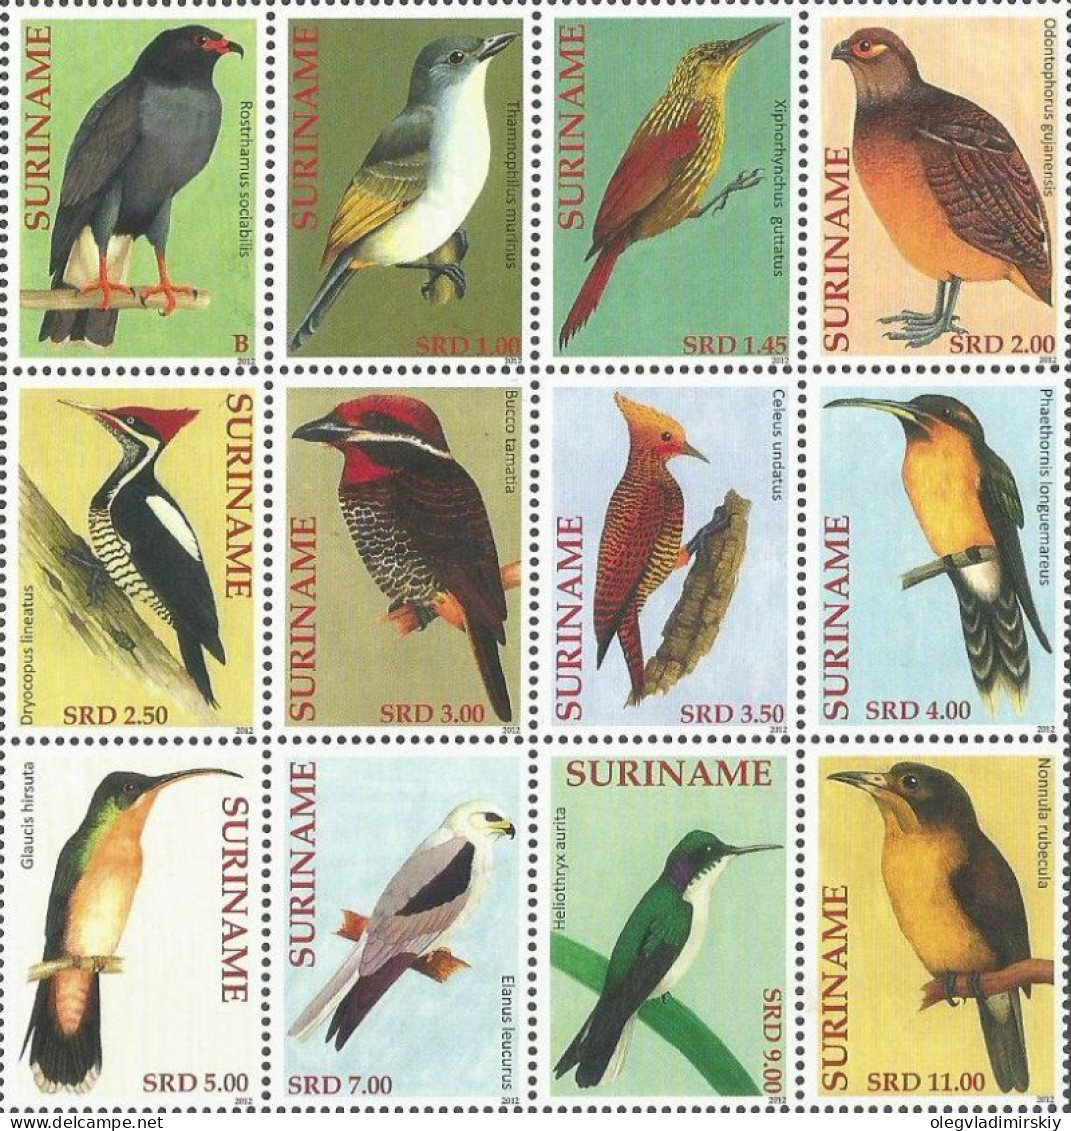 Suriname Surinam 2012 Tropical Forest Birds Set Of 12 Stamps In Block 3x4 MNH - Zangvogels